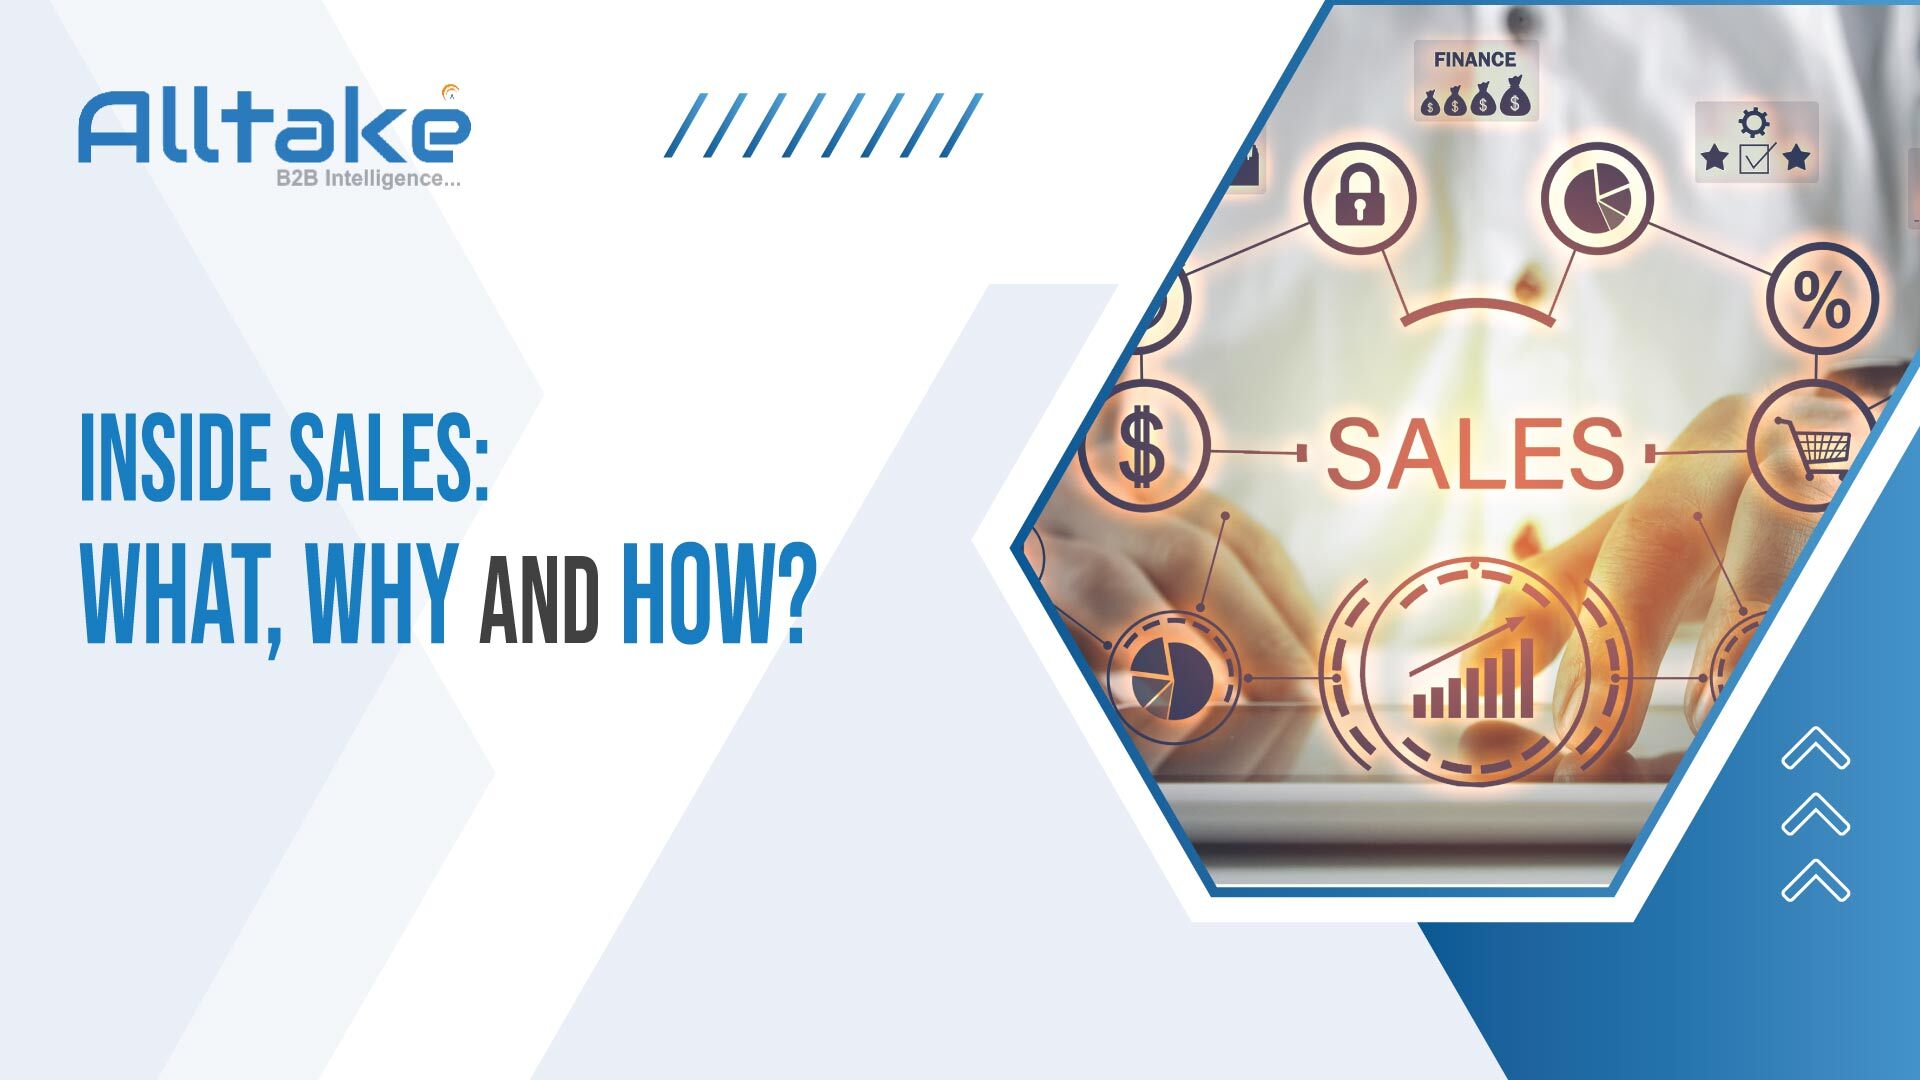 Inside Sales: What, Why and How?